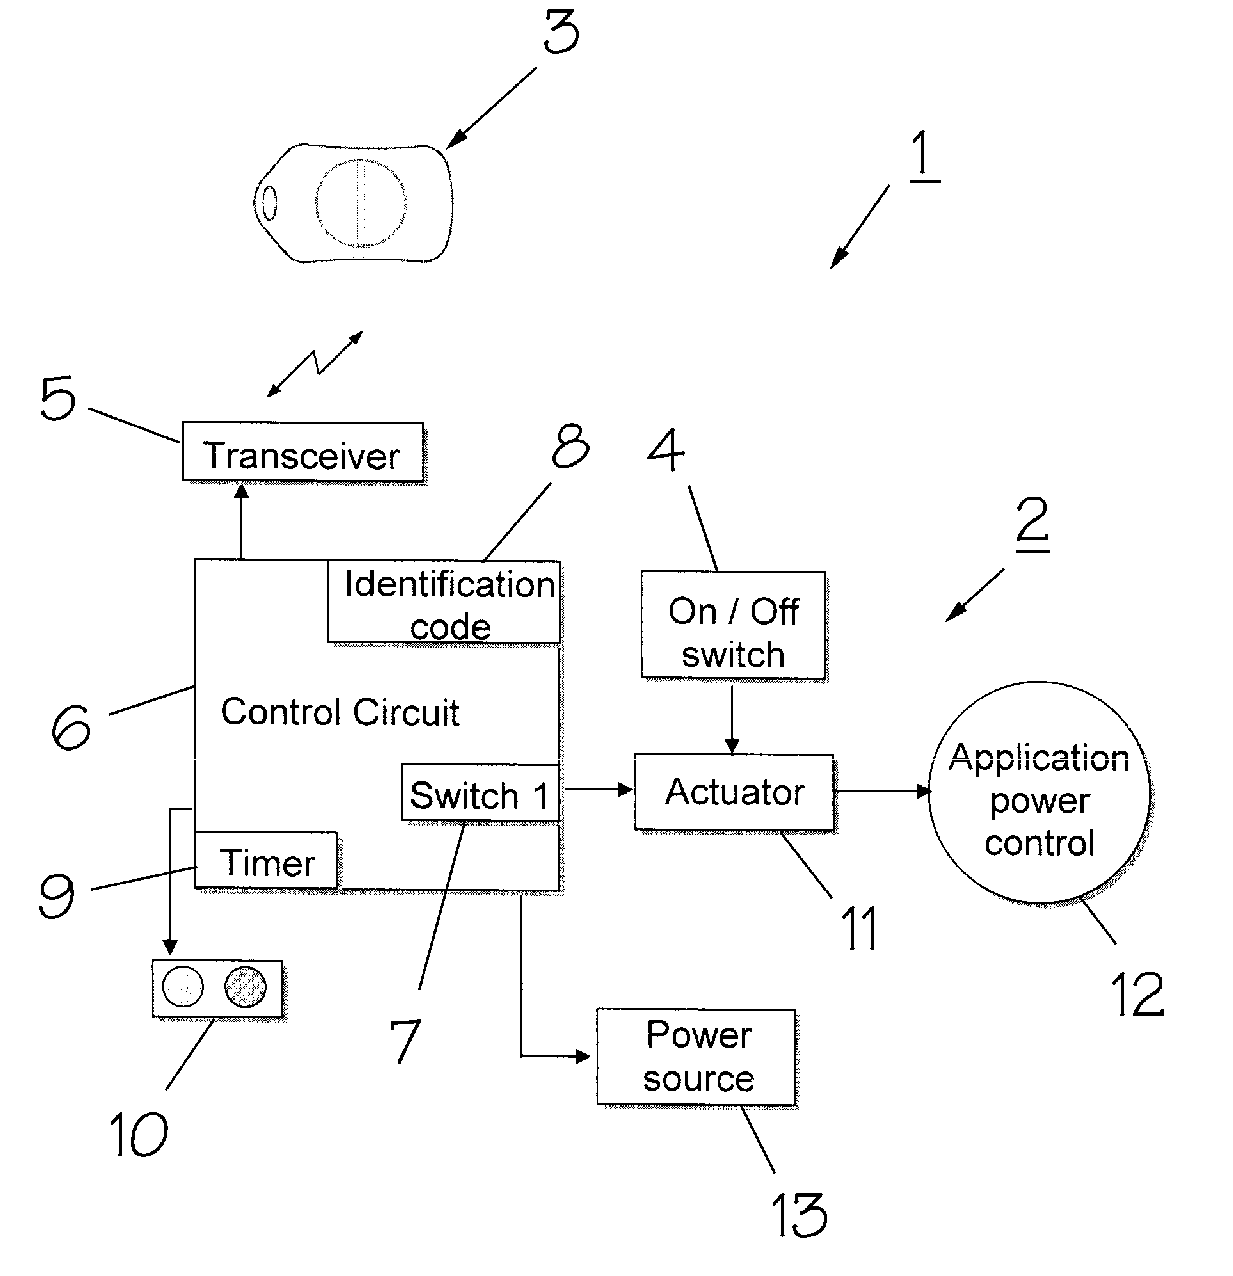 Electronically enabling devices remotely